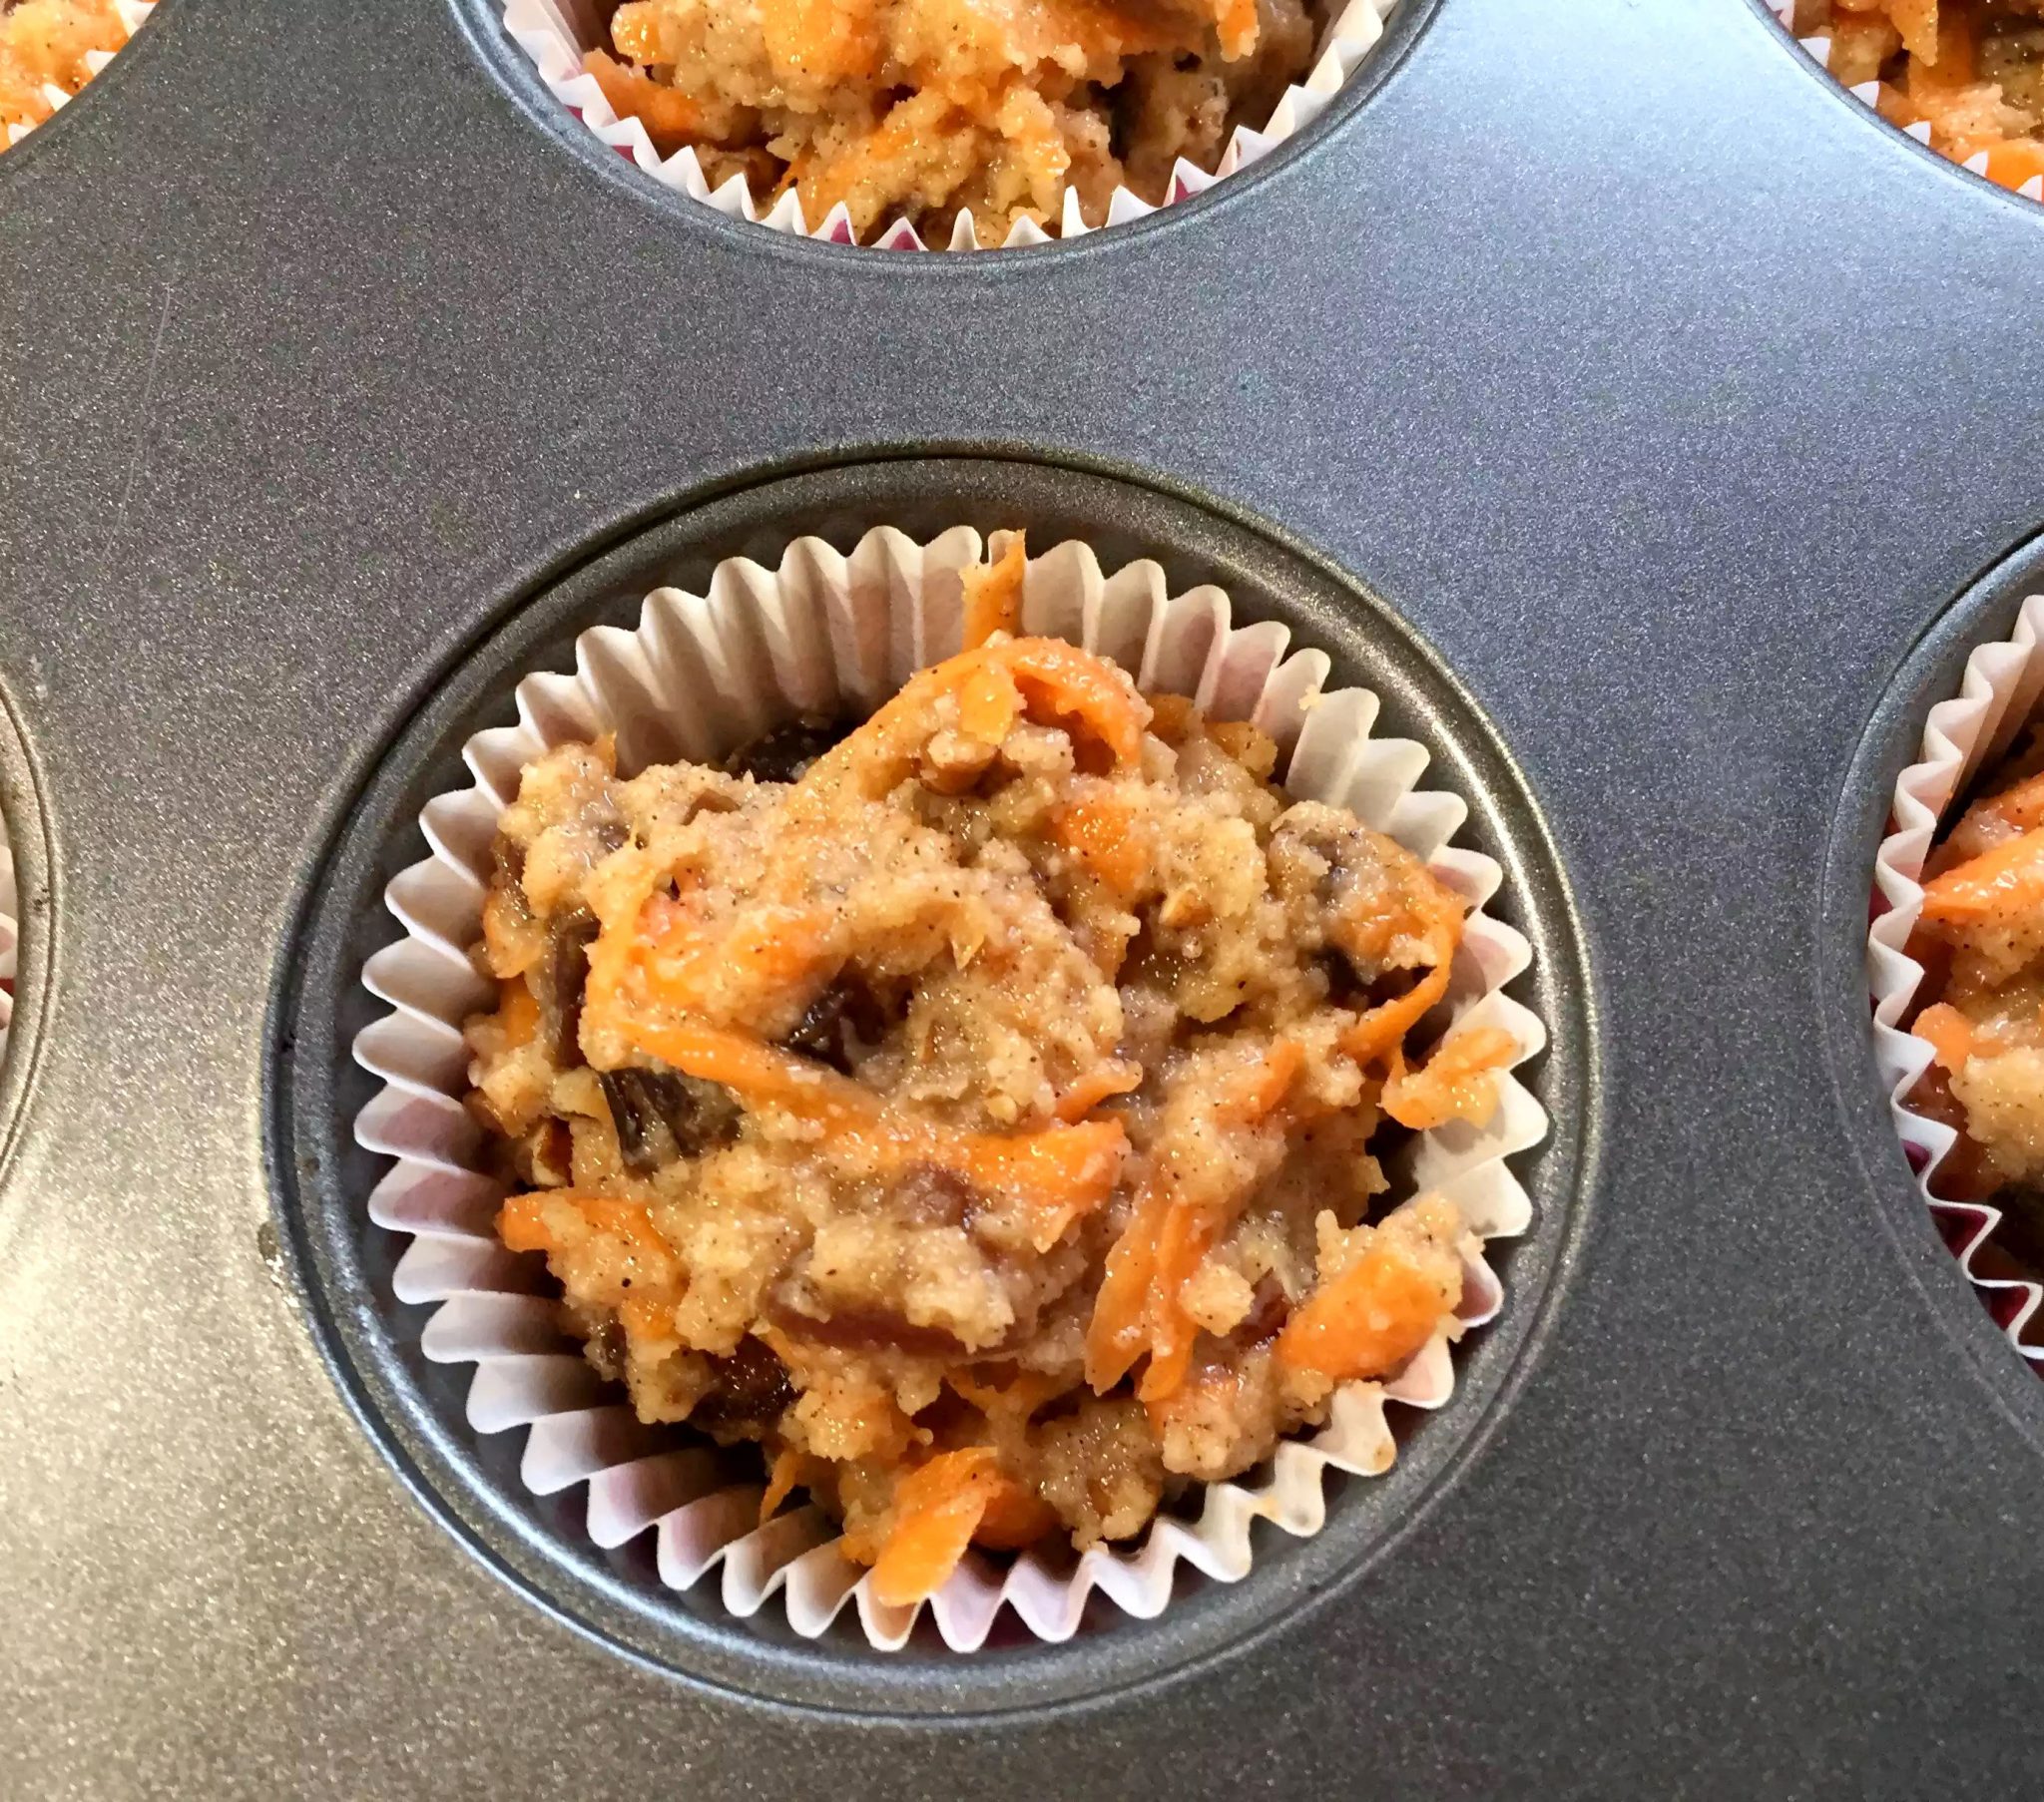 Carrot Cake Muffins SCD Paleo Almond Coconut Oil Honey Baking Specific Carbohydrate Diet Gluten-Free Grain Free Clean Eating Birthday